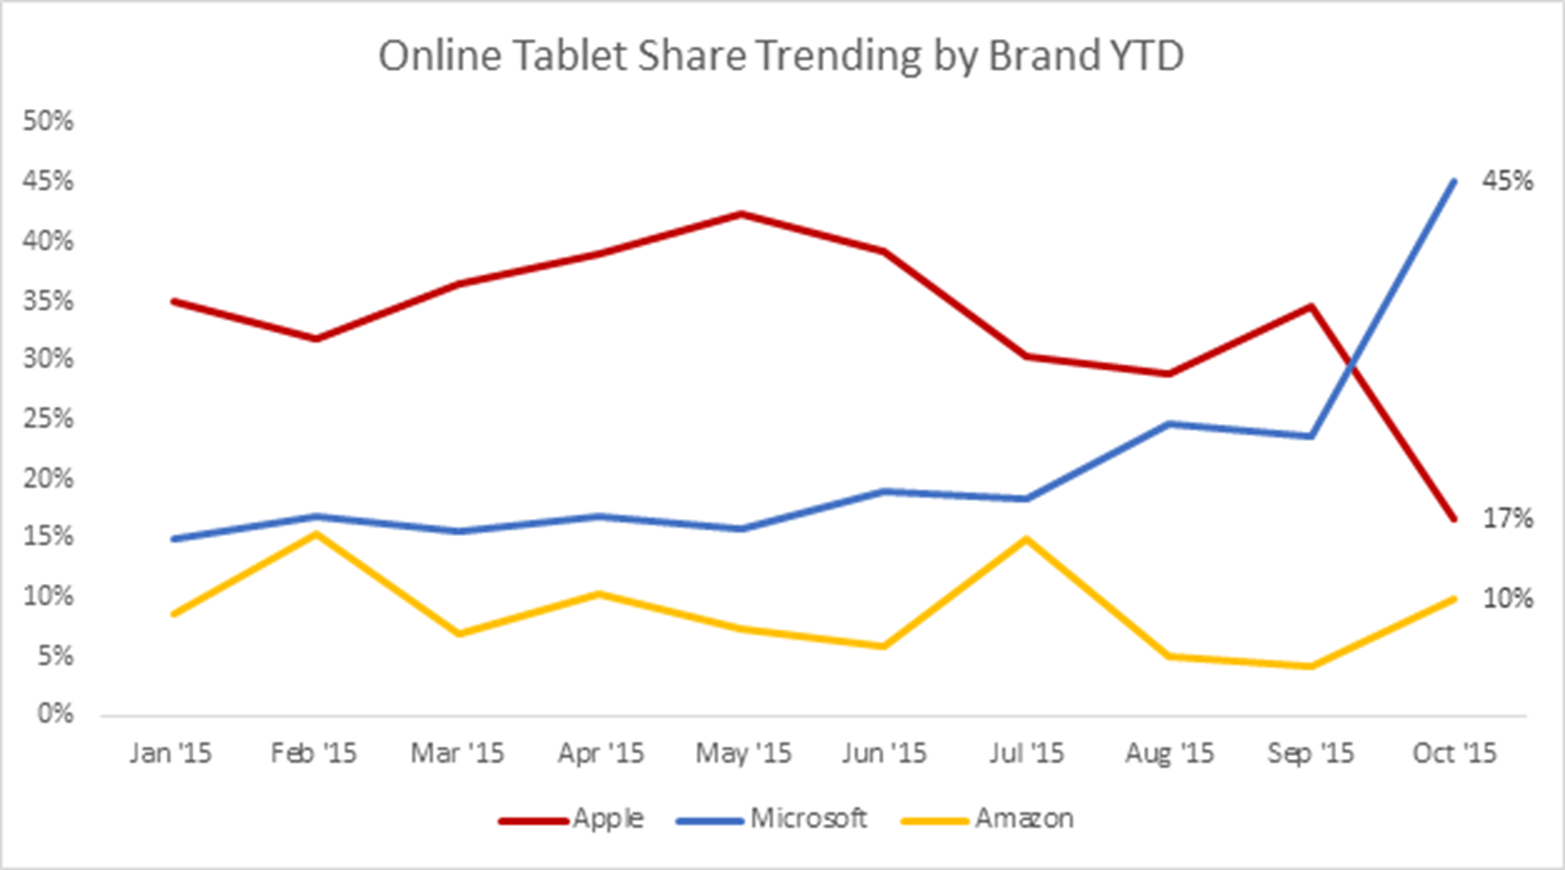 Tablet sales on the rise for Apple iPad and Microsoft Surface